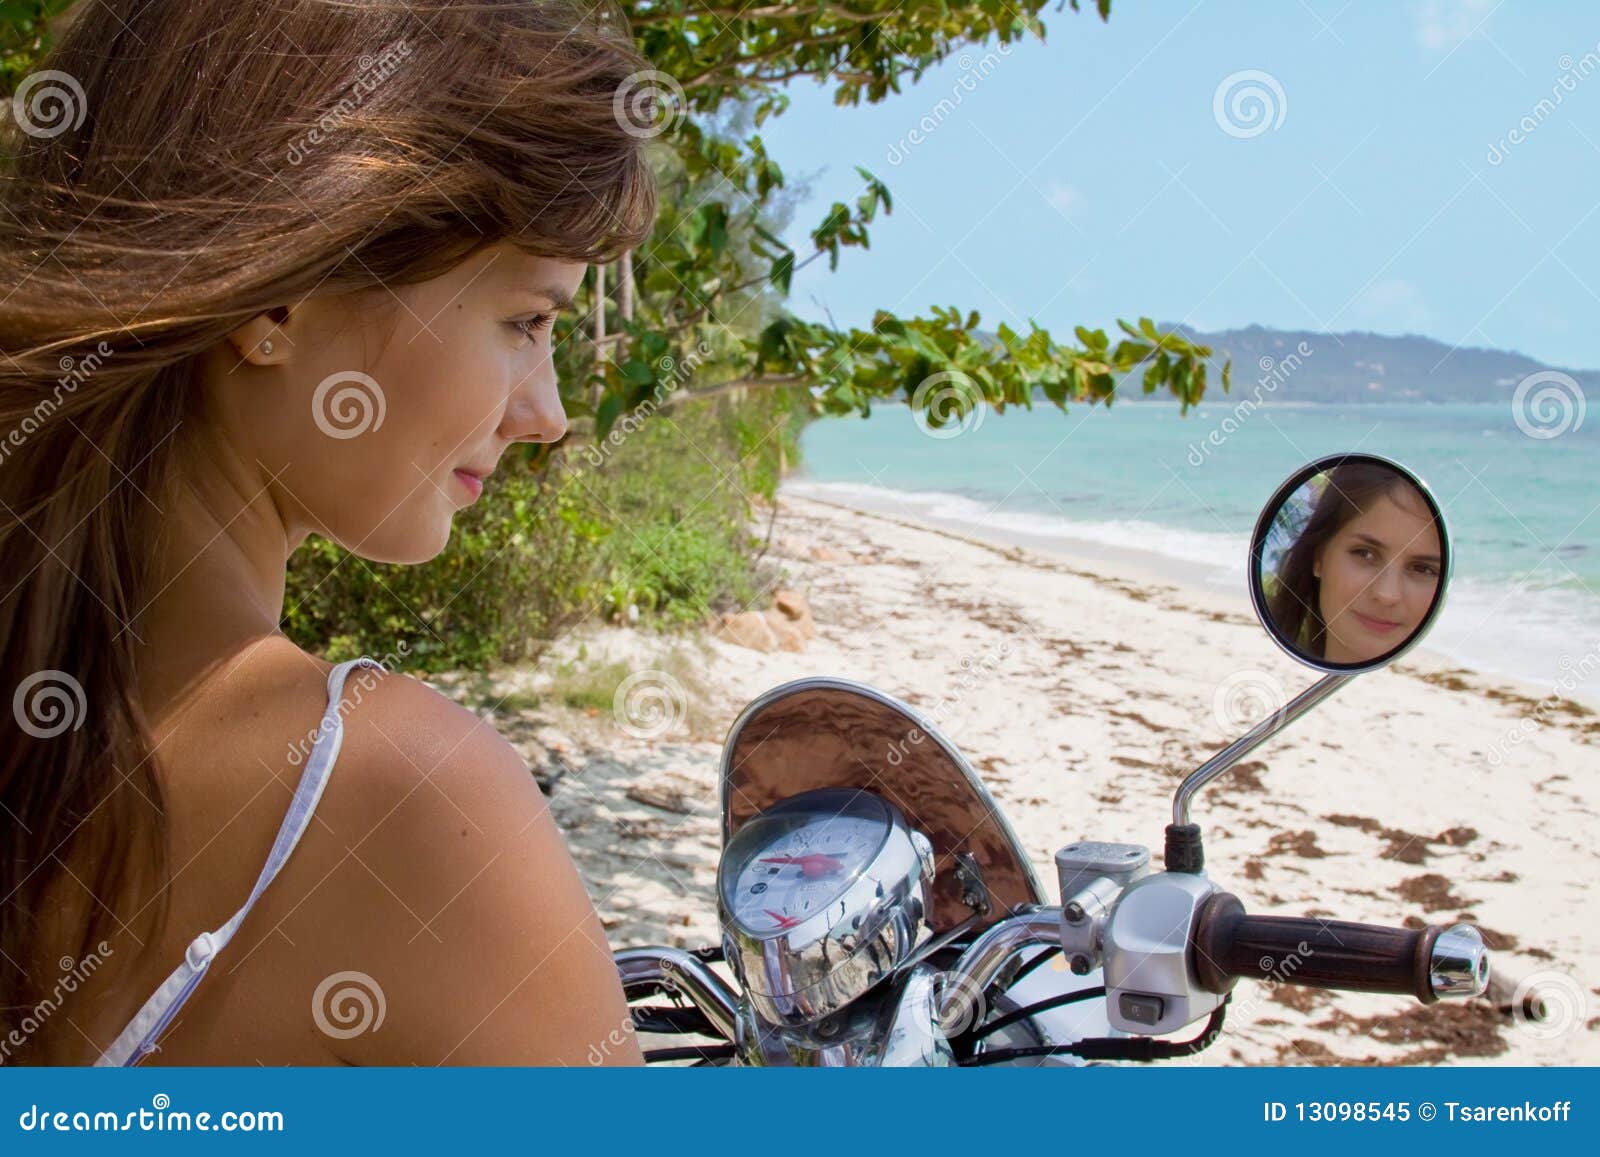 The Girl On A Motorcycle Stock Image Image Of Black 13098545